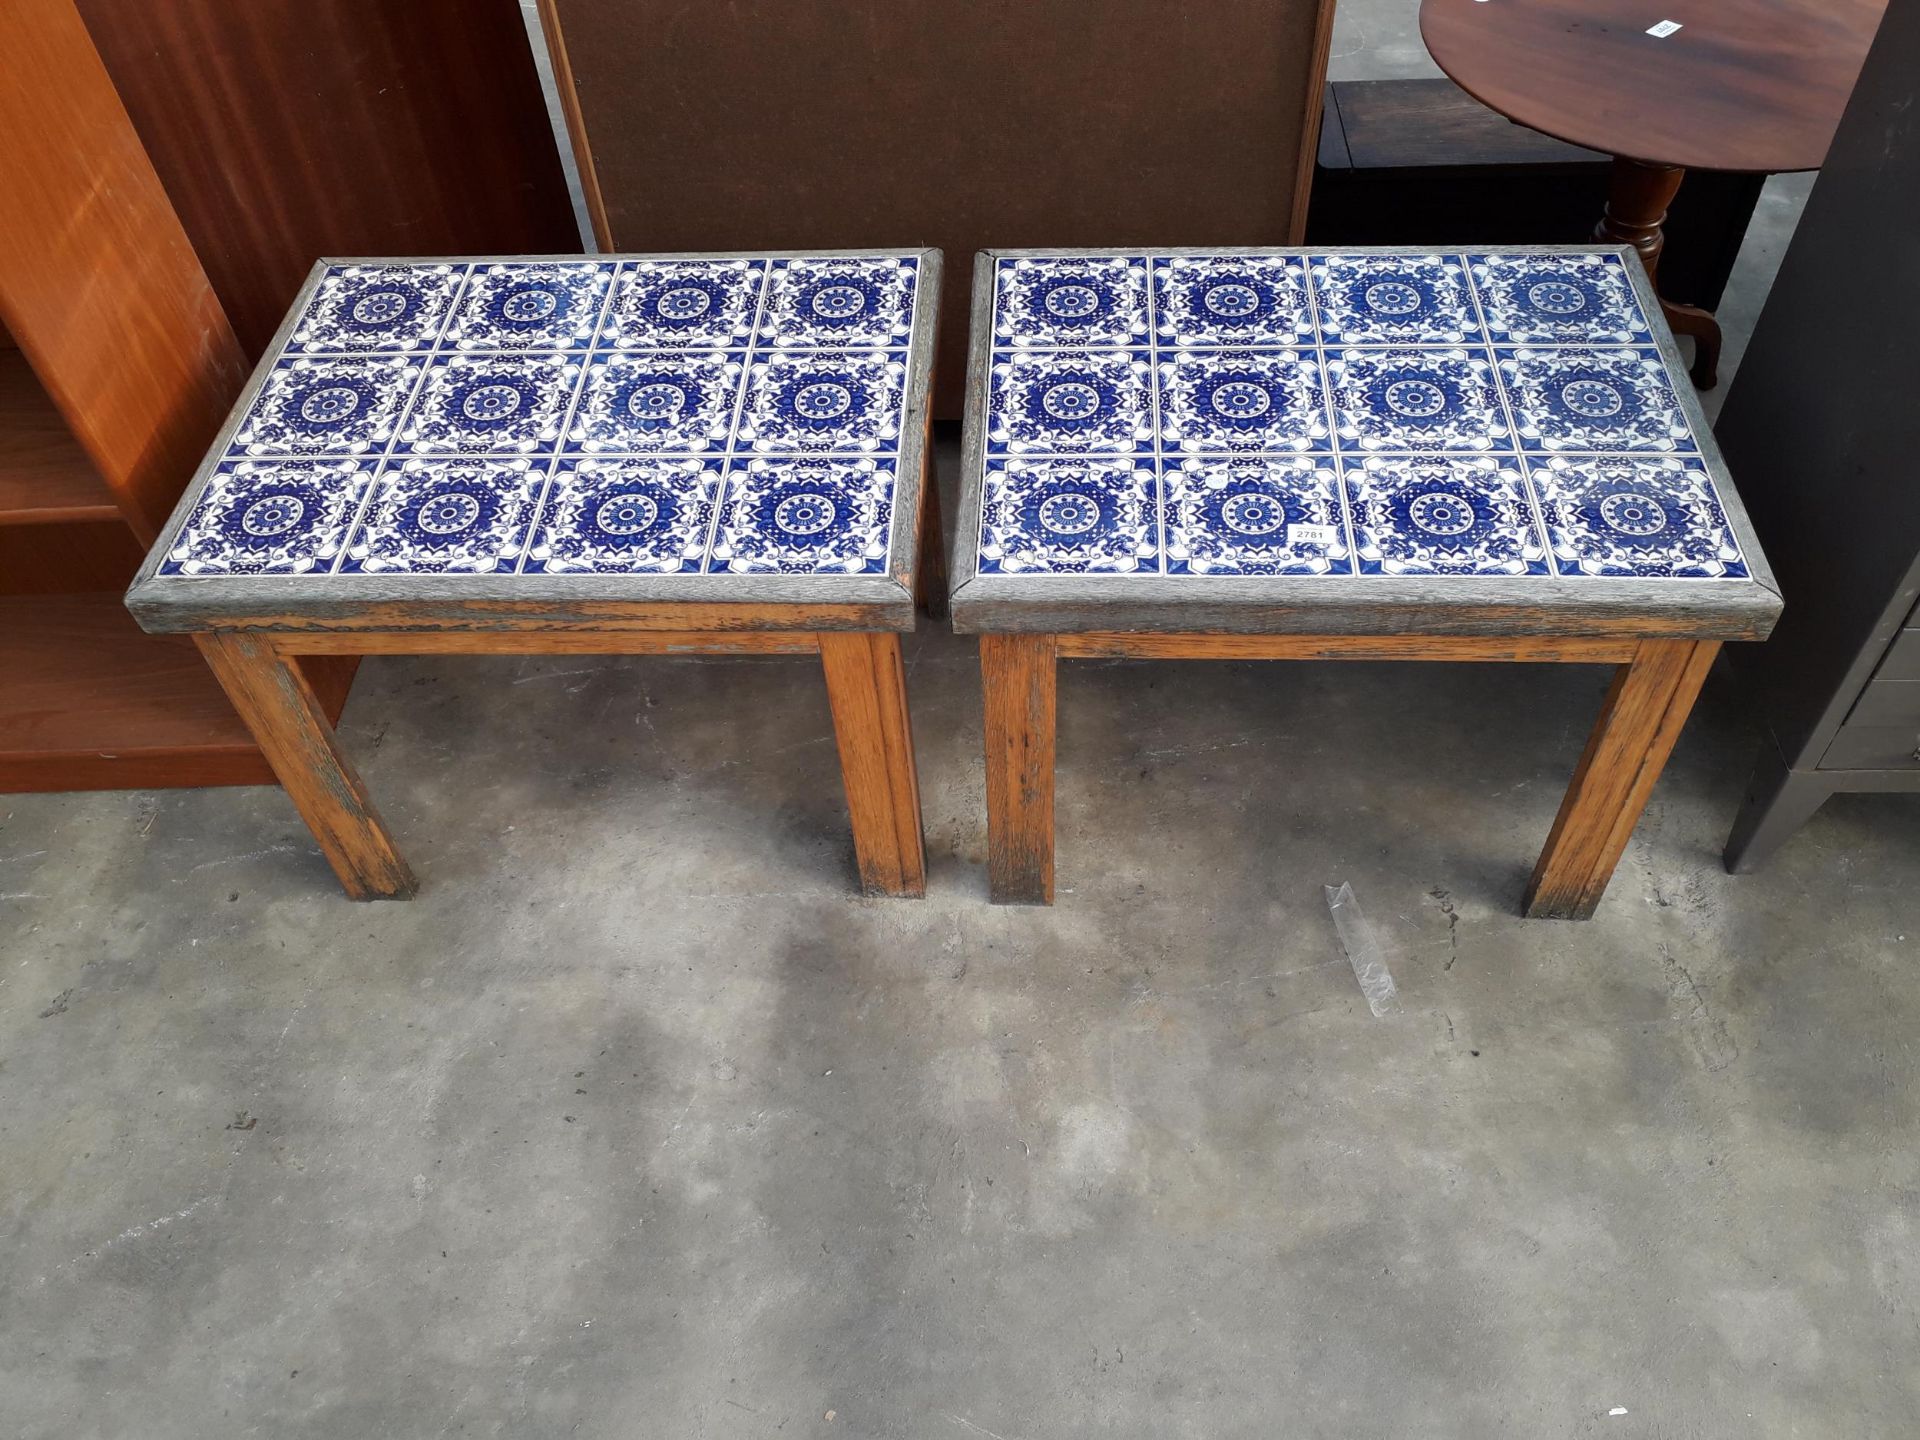 A PAIR OF MODERN COFFEE TABLES WITH BLUE AND WHITE TILED TOPS, 26 X 20" EACH